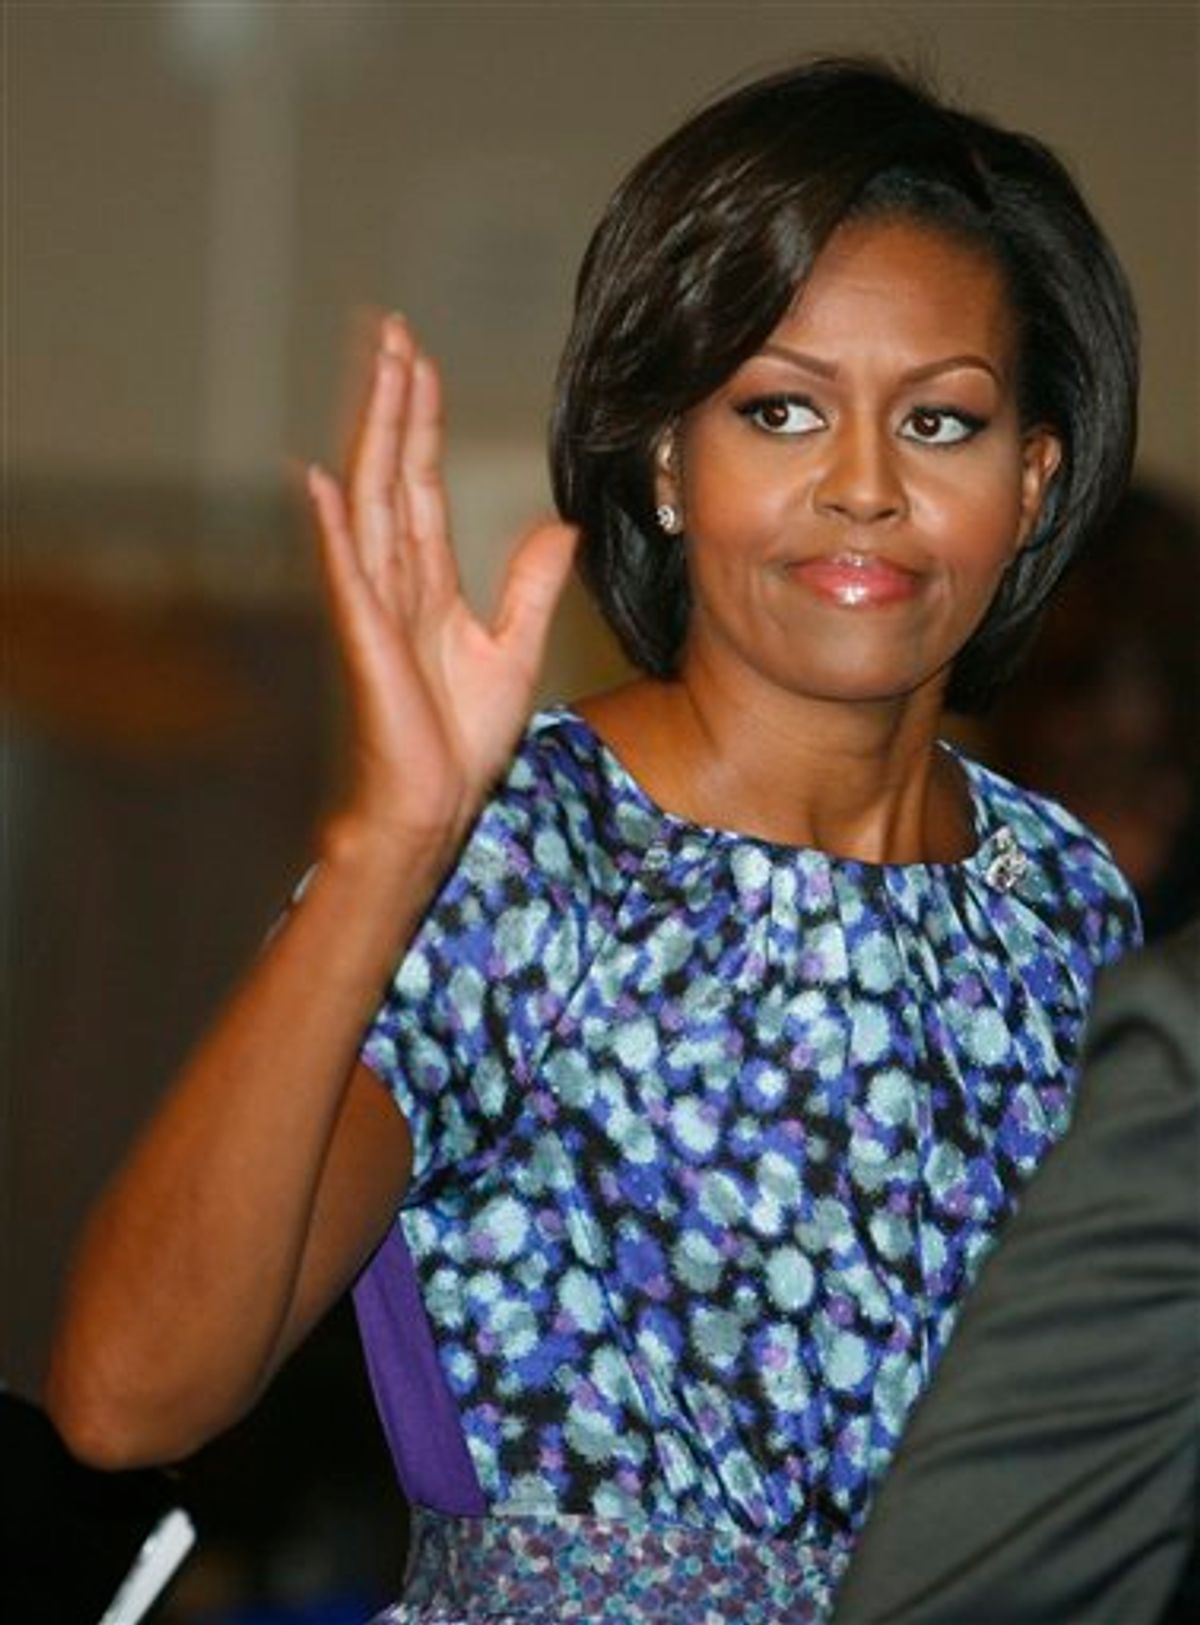 Michelle Obama, first lady of the United States, arrives at the 65th session of the United Nations General Assembly at United Nations headquarters on Thursday, Sept. 23, 2010. (AP Photo/David Karp) (AP)